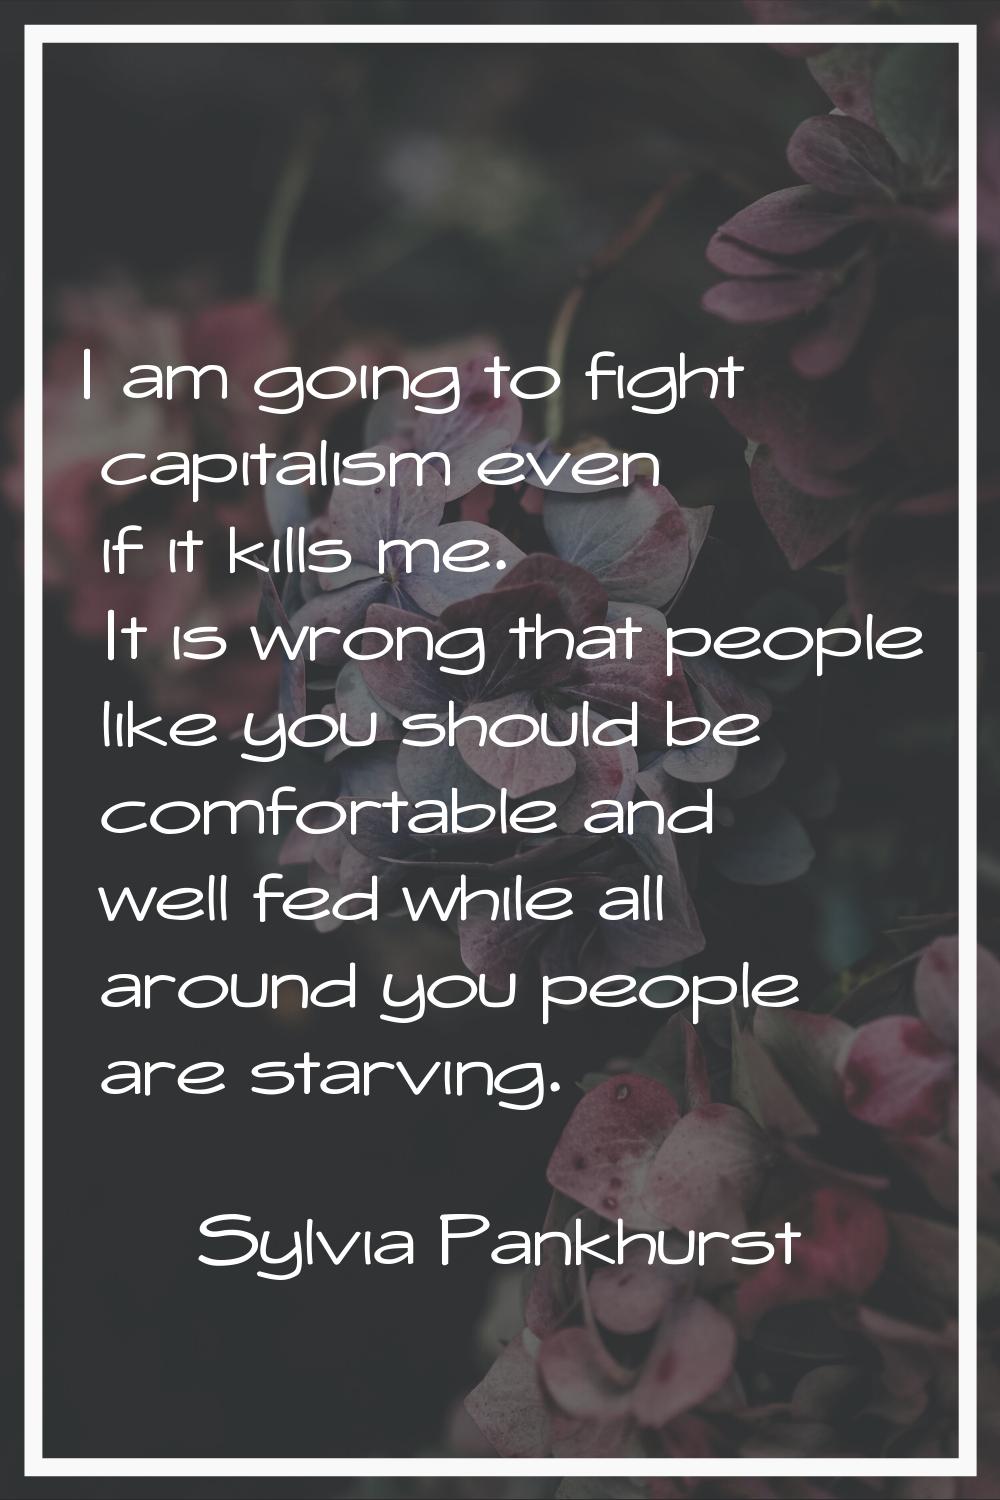 I am going to fight capitalism even if it kills me. It is wrong that people like you should be comf